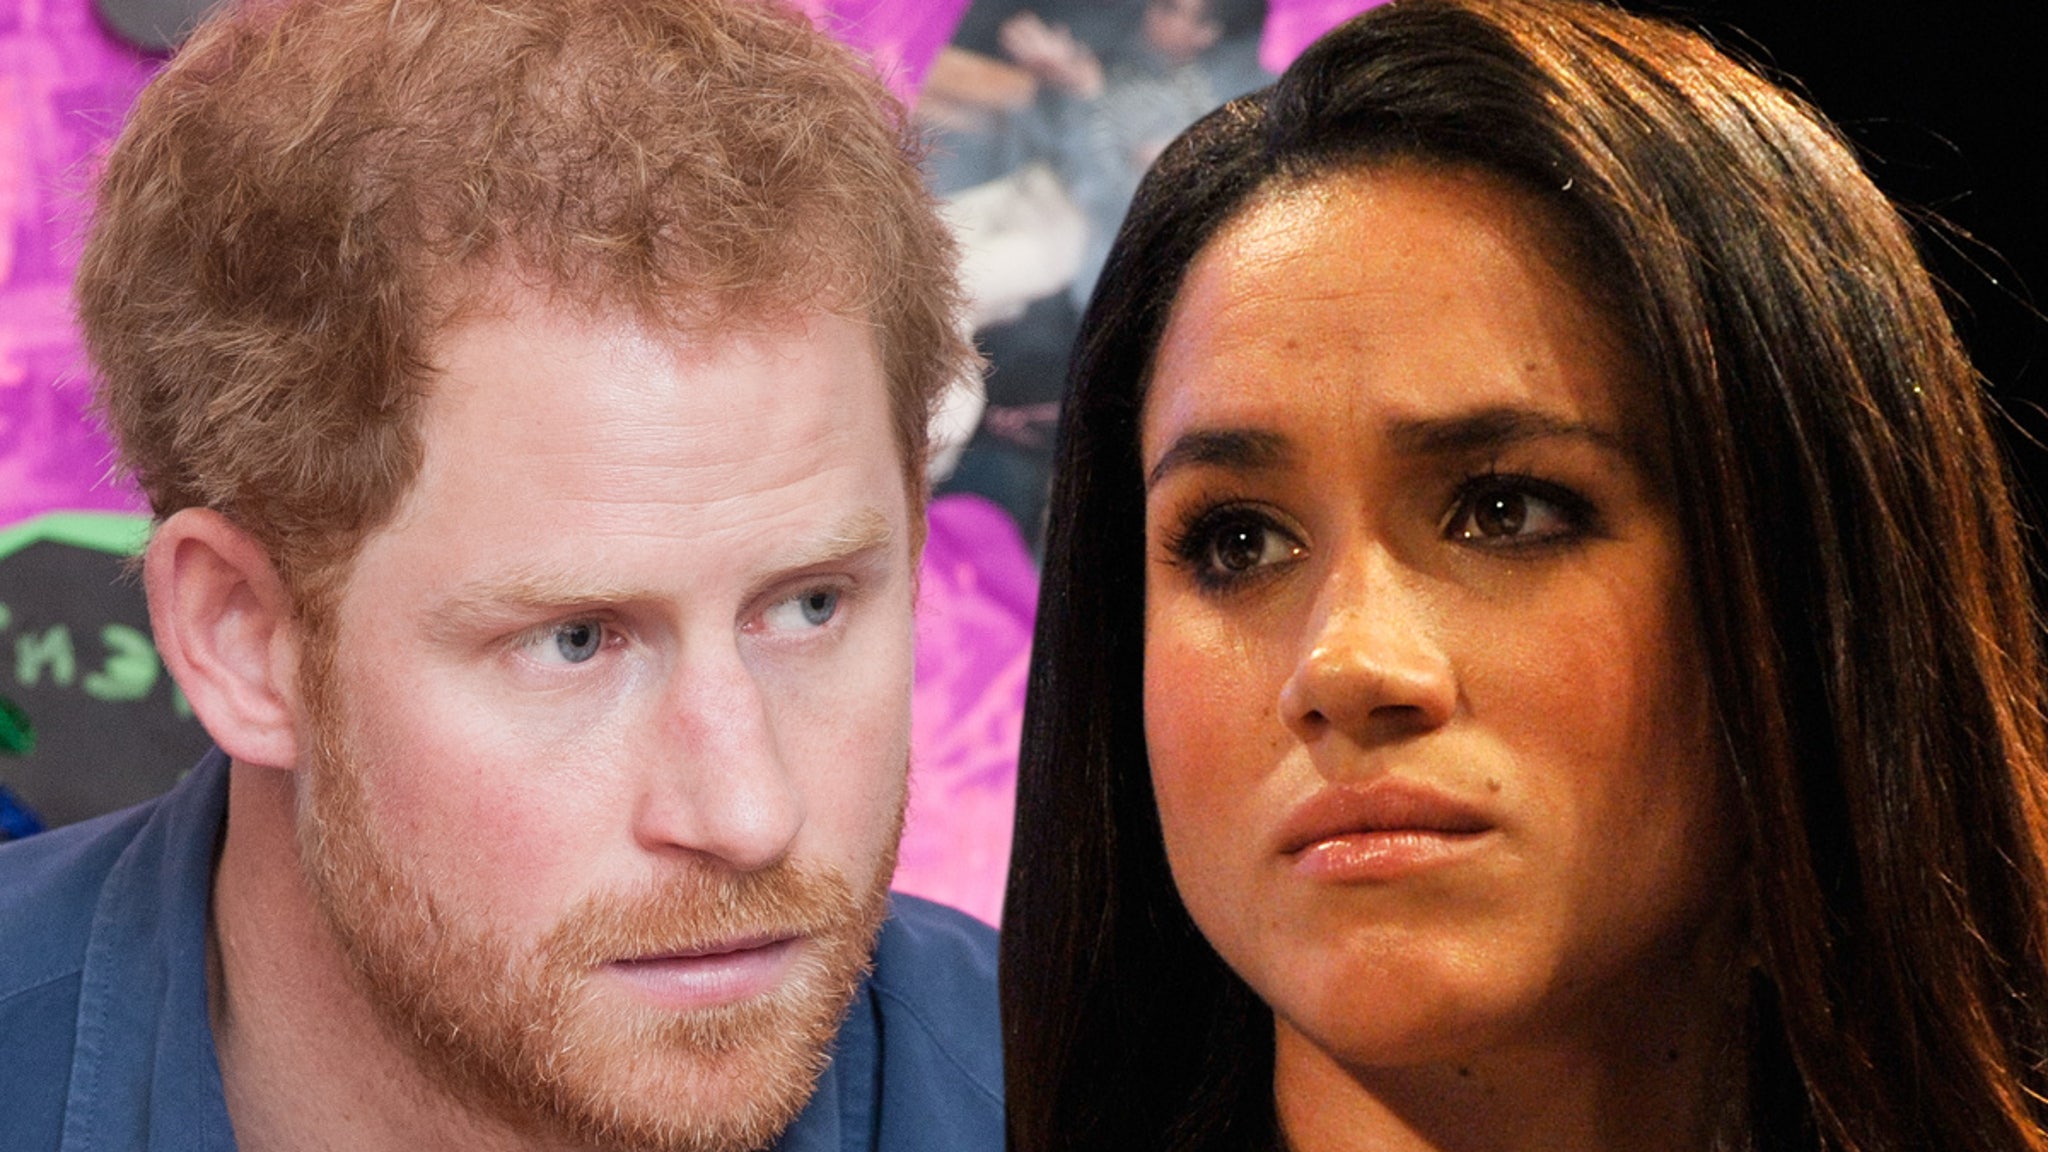 Prince Harry and Meghan Markle’s Montecito Estate invaded by an intruder